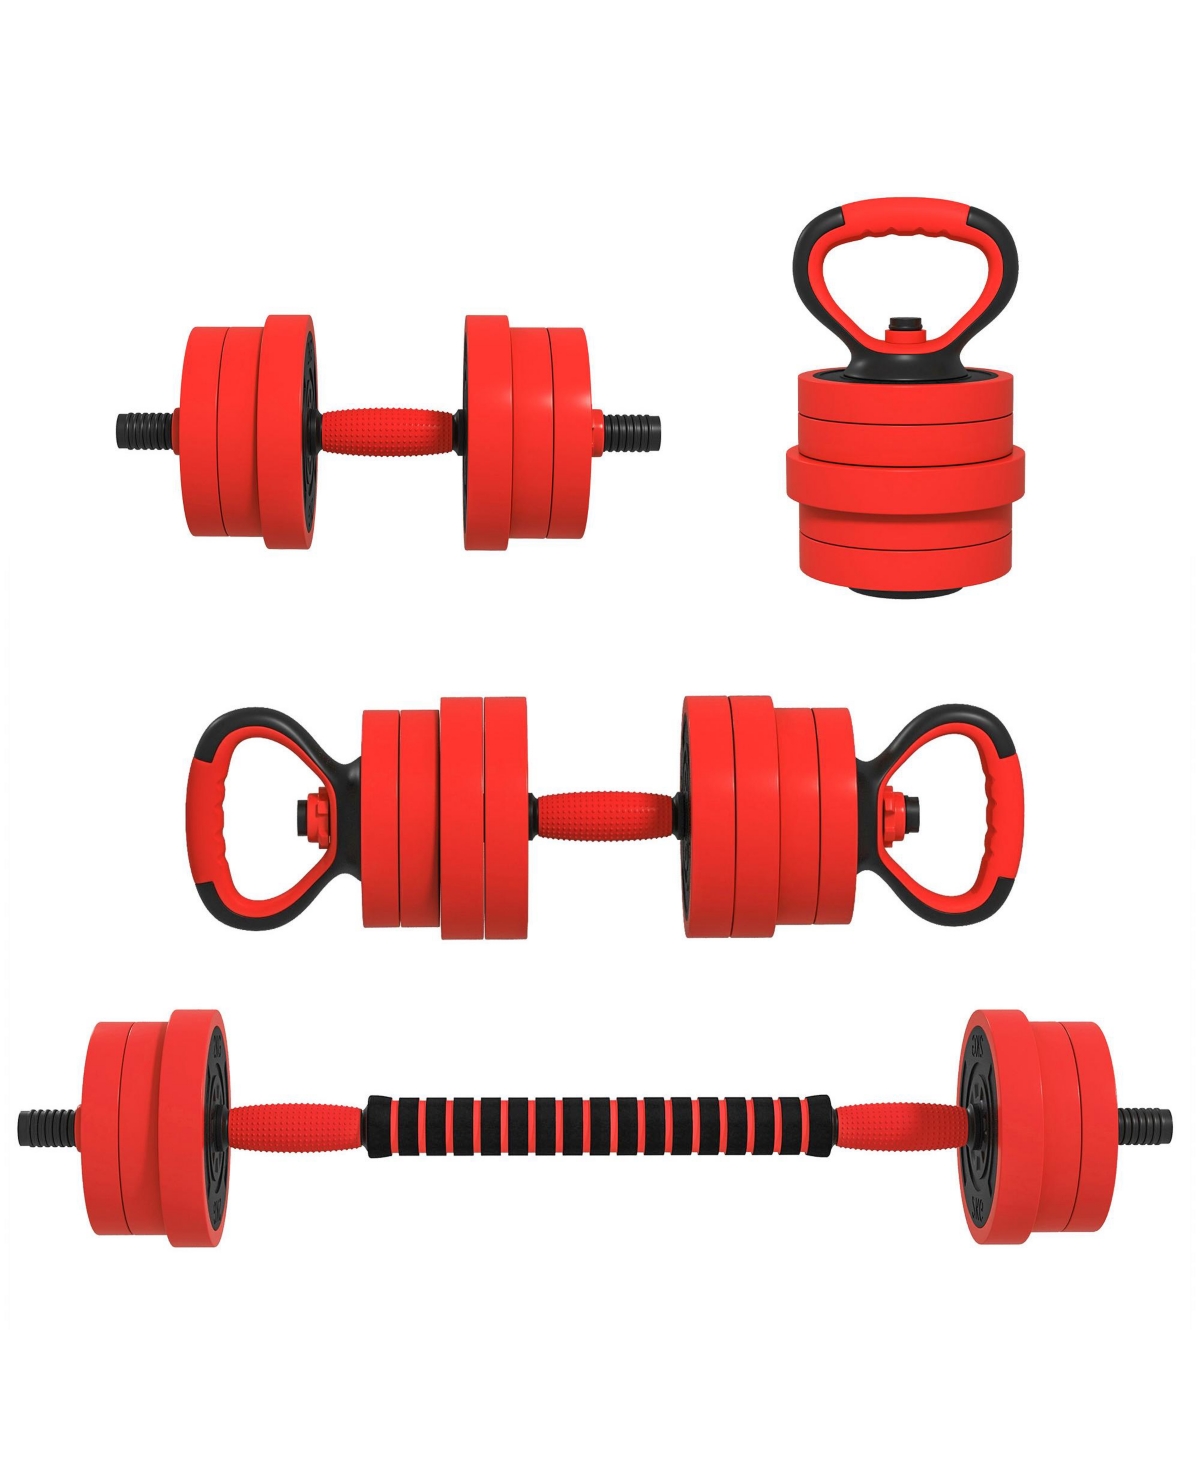 44LBS Dumbbells Set Used as Barbell, Kettle bell, Push up Stand - Red